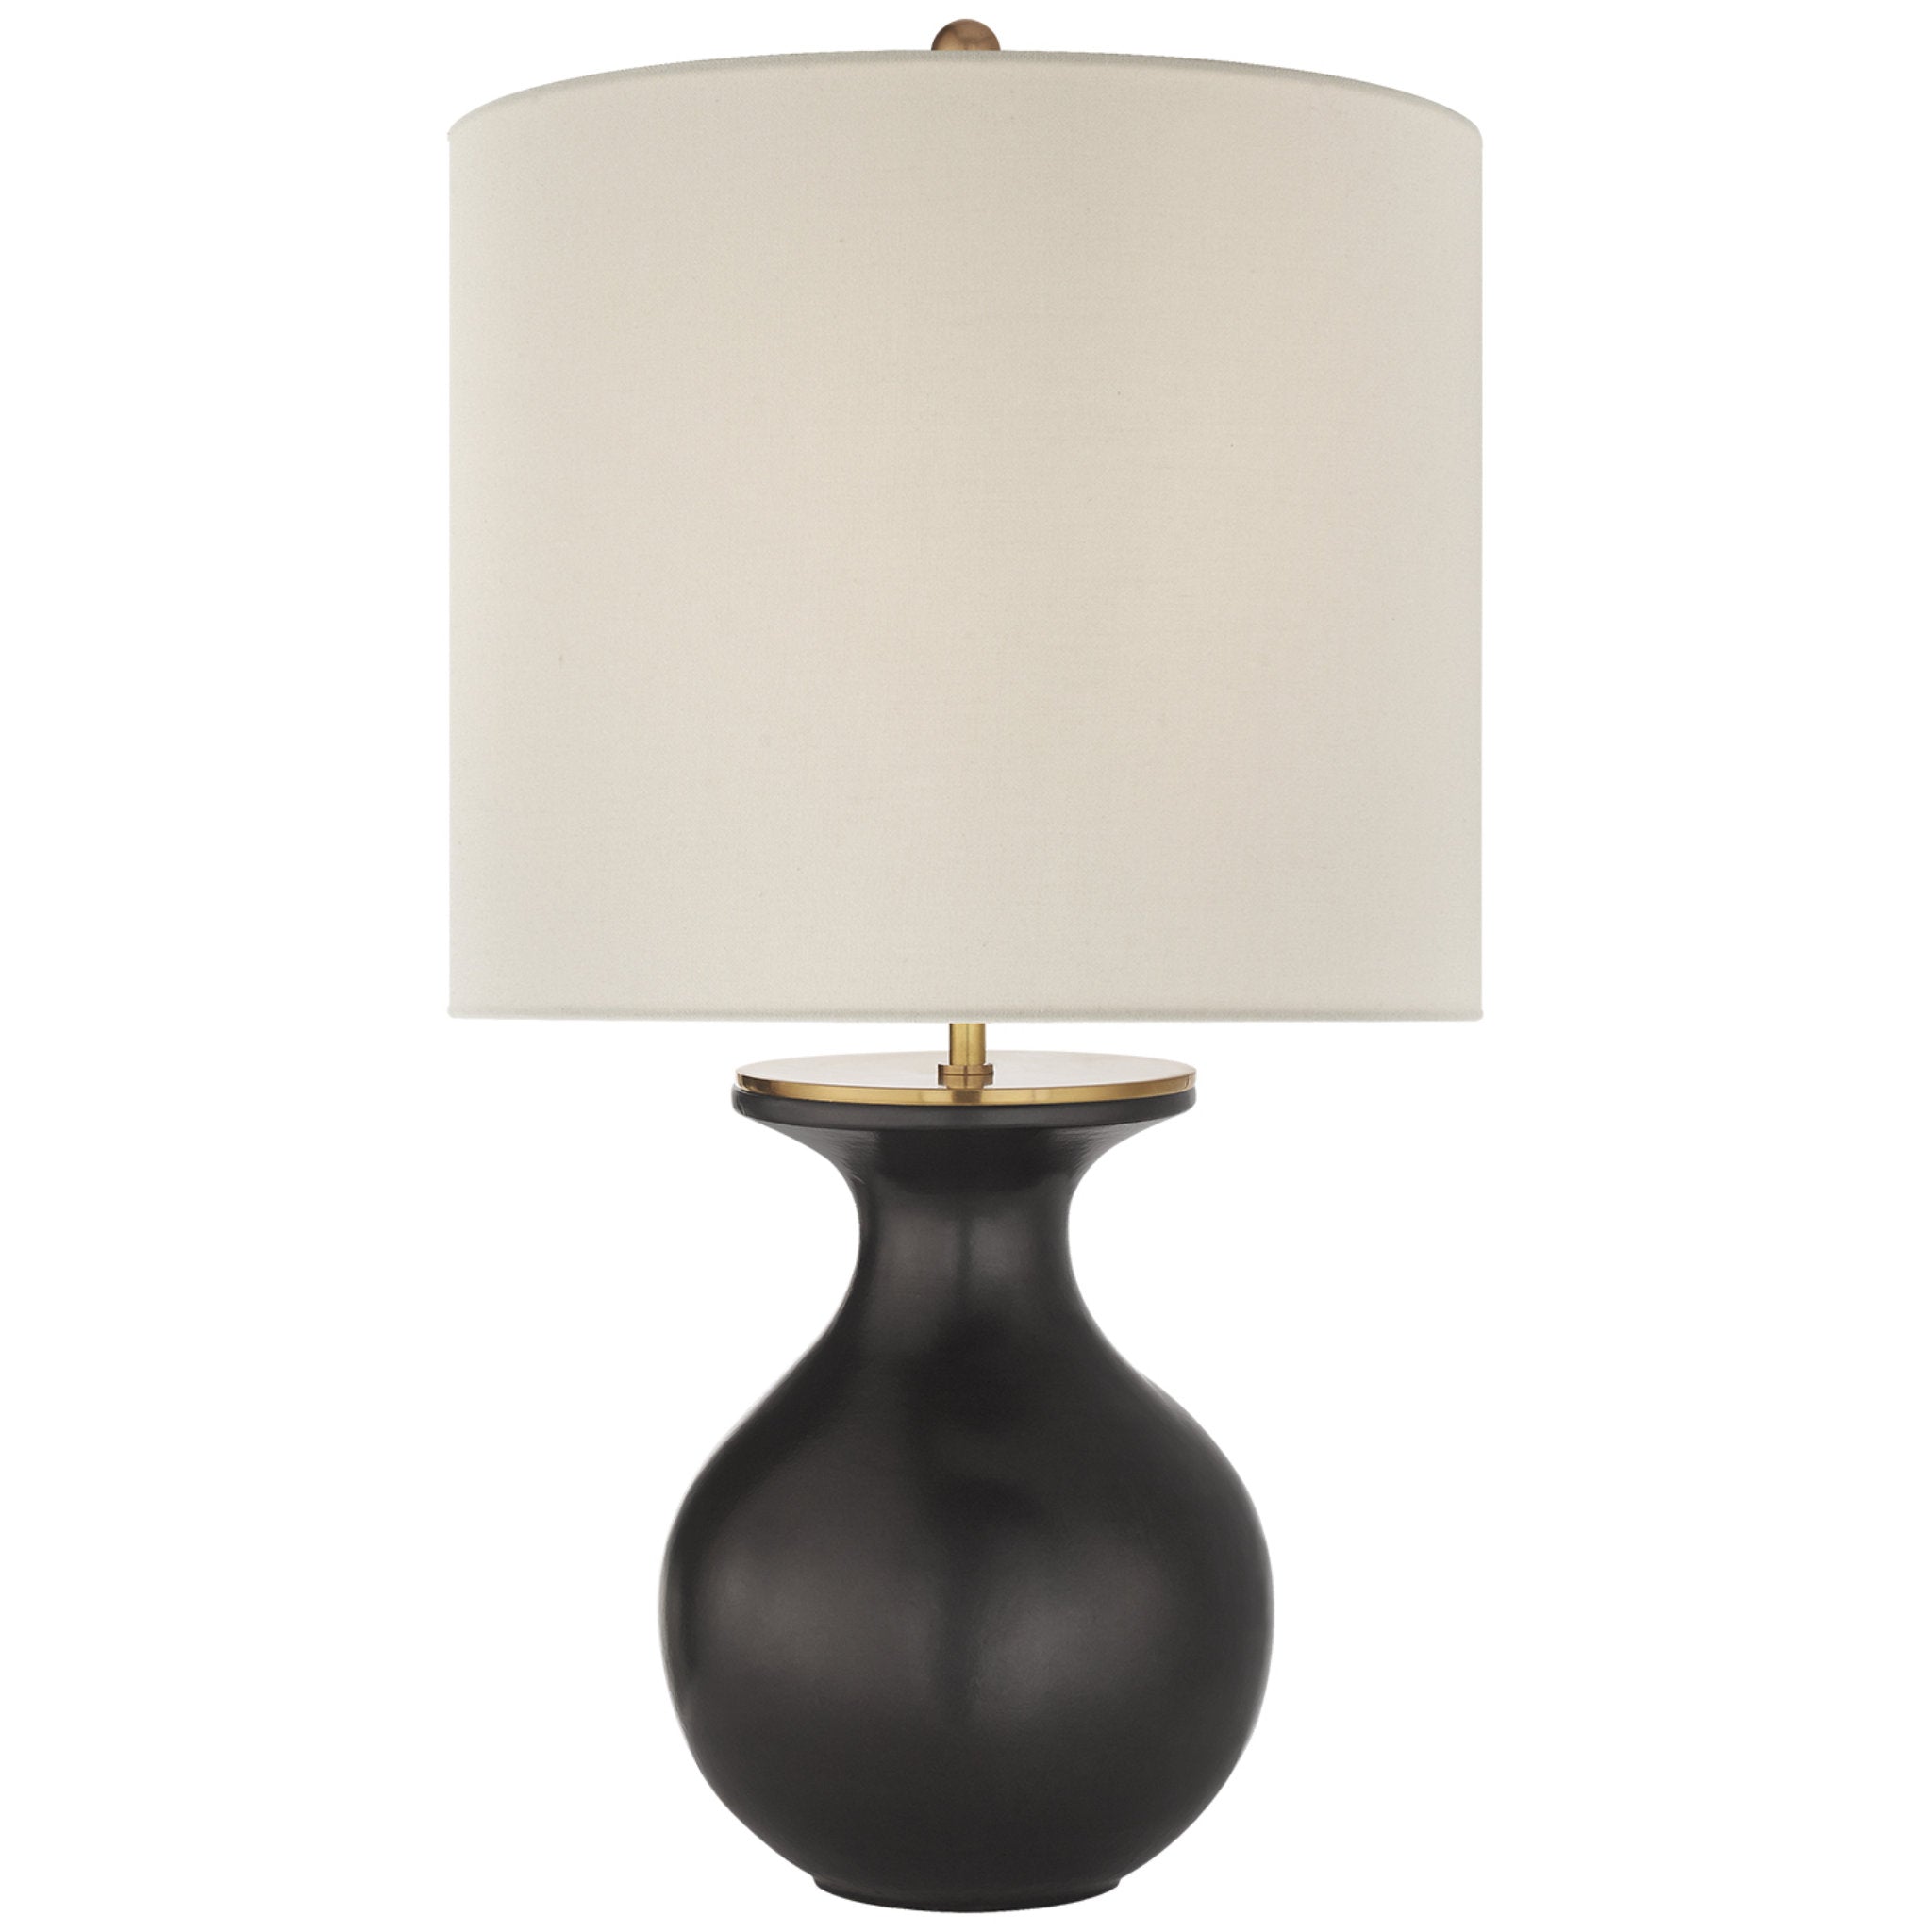 kate spade new york Albie Small Desk Lamp in Metallic Black with Cream Linen Shade